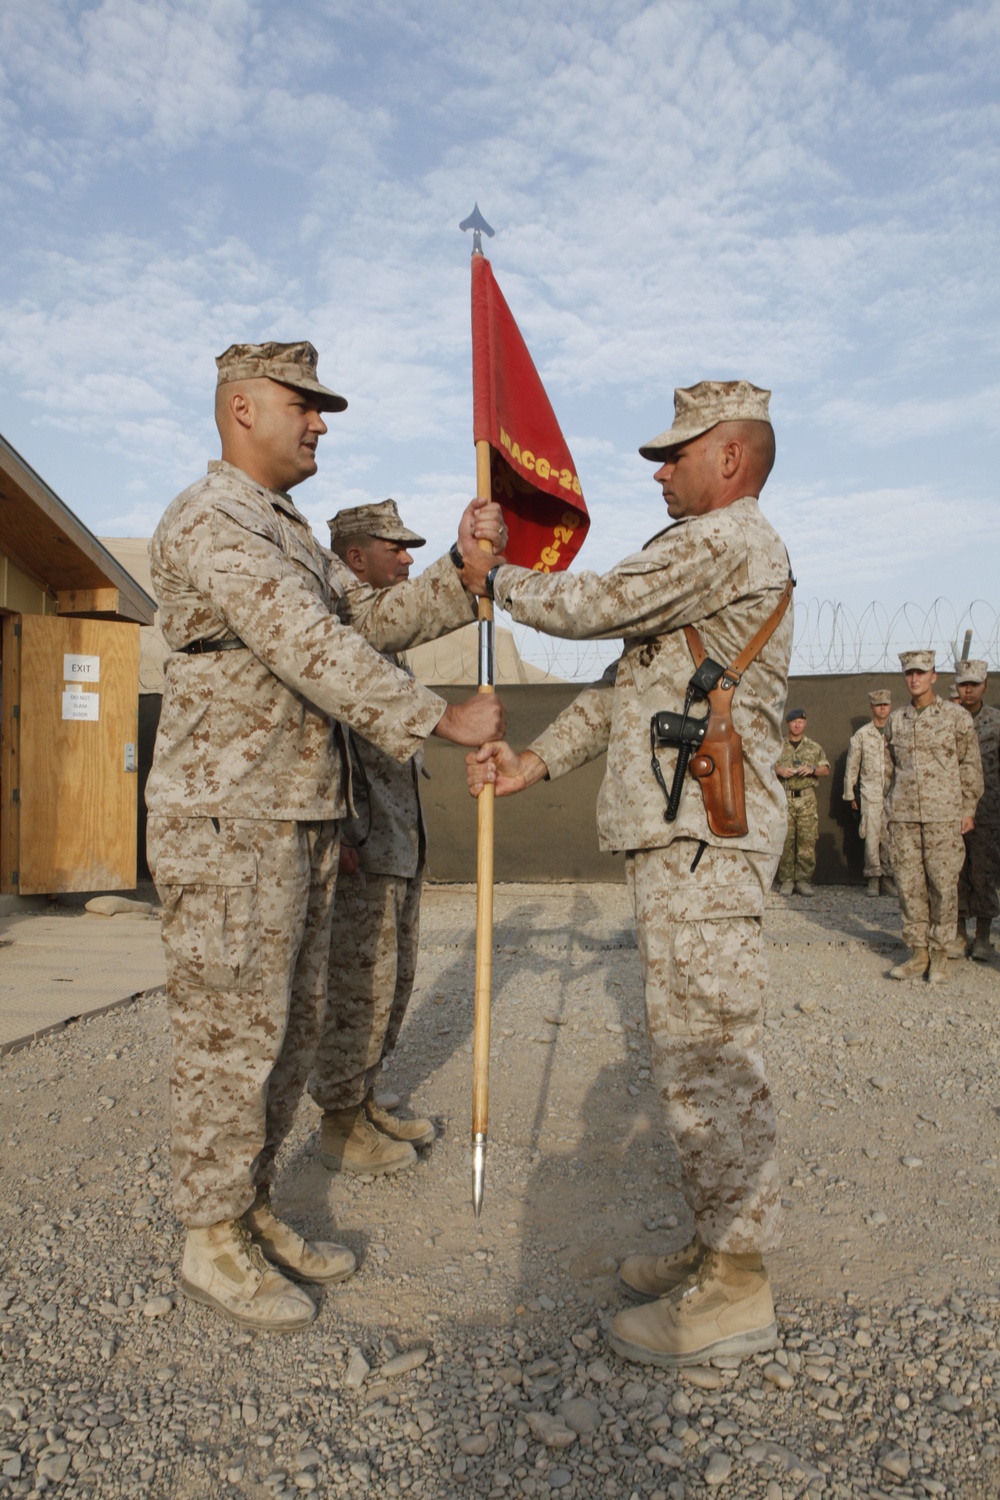 New commander takes helm of Marine air command, control group in Afghanistan